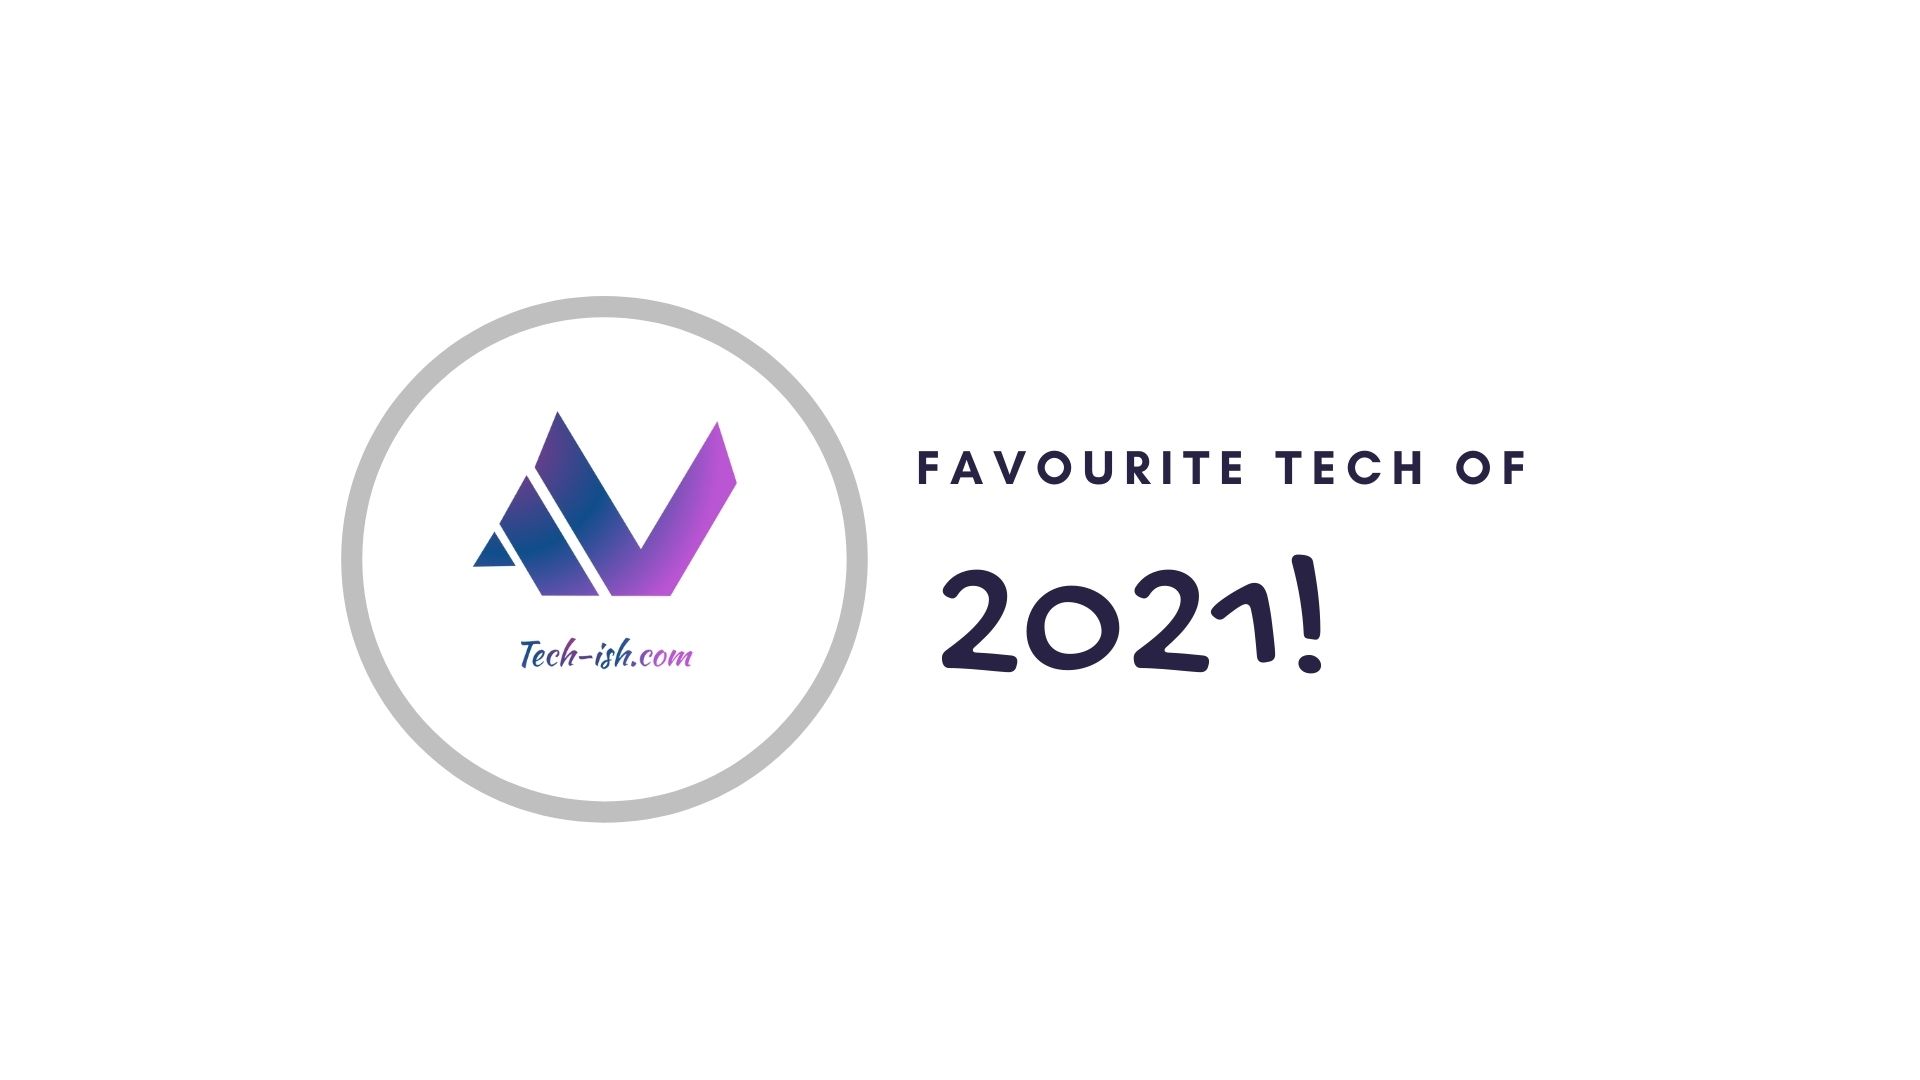 My Favourite Tech of 2021